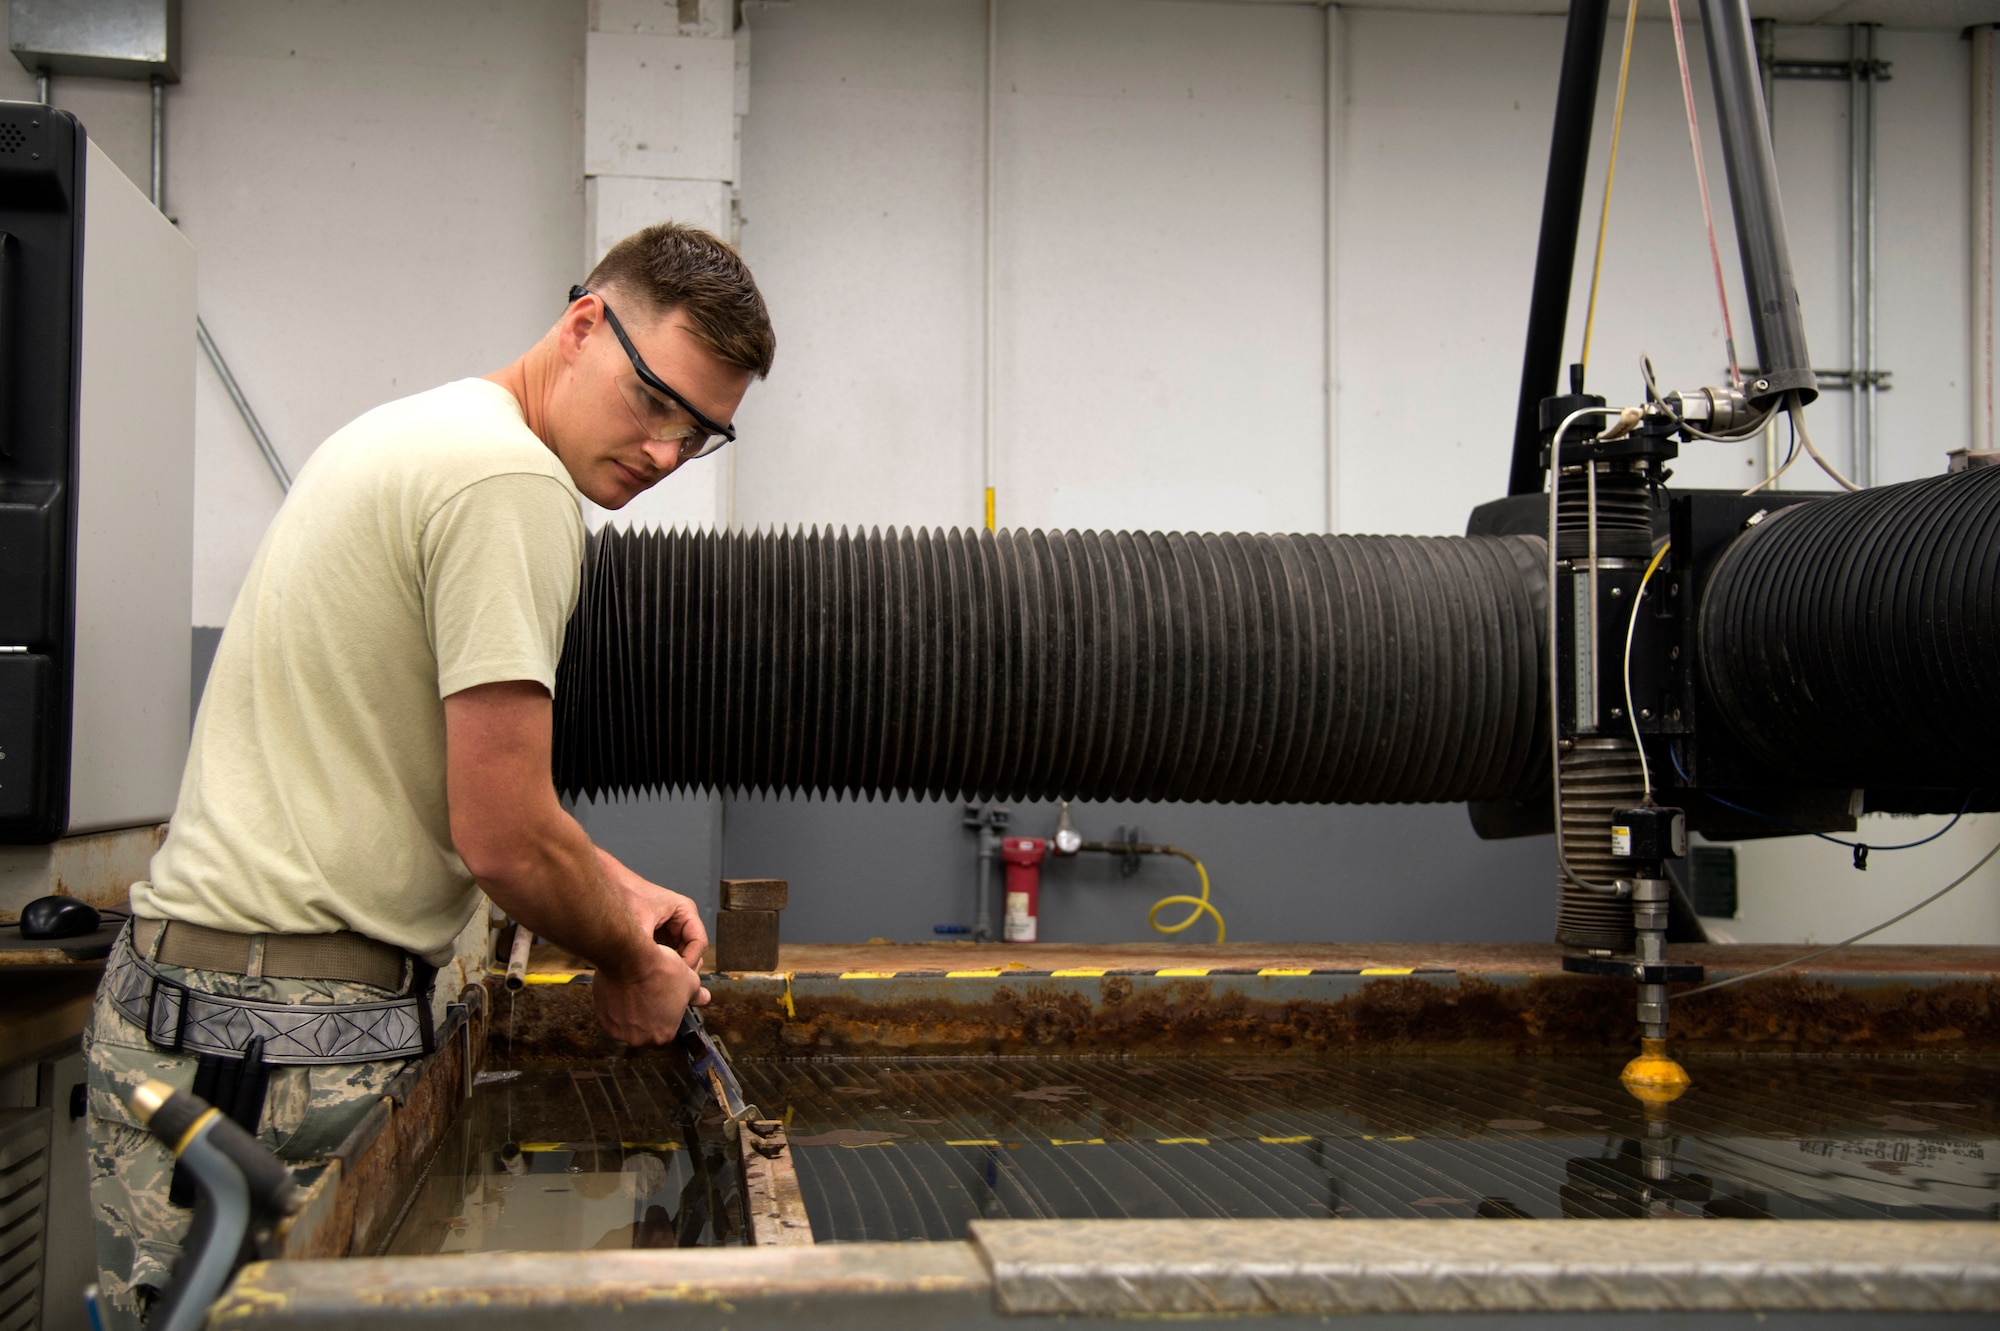 U.S. Air Force Staff Sgt. Eric Griese, an aircraft metals technology technician assigned to the 6th Maintenance Squadron, prepares to cut a design into a piece of sheet metal at MacDill Air Force Base Fla., Nov. 7, 2017.